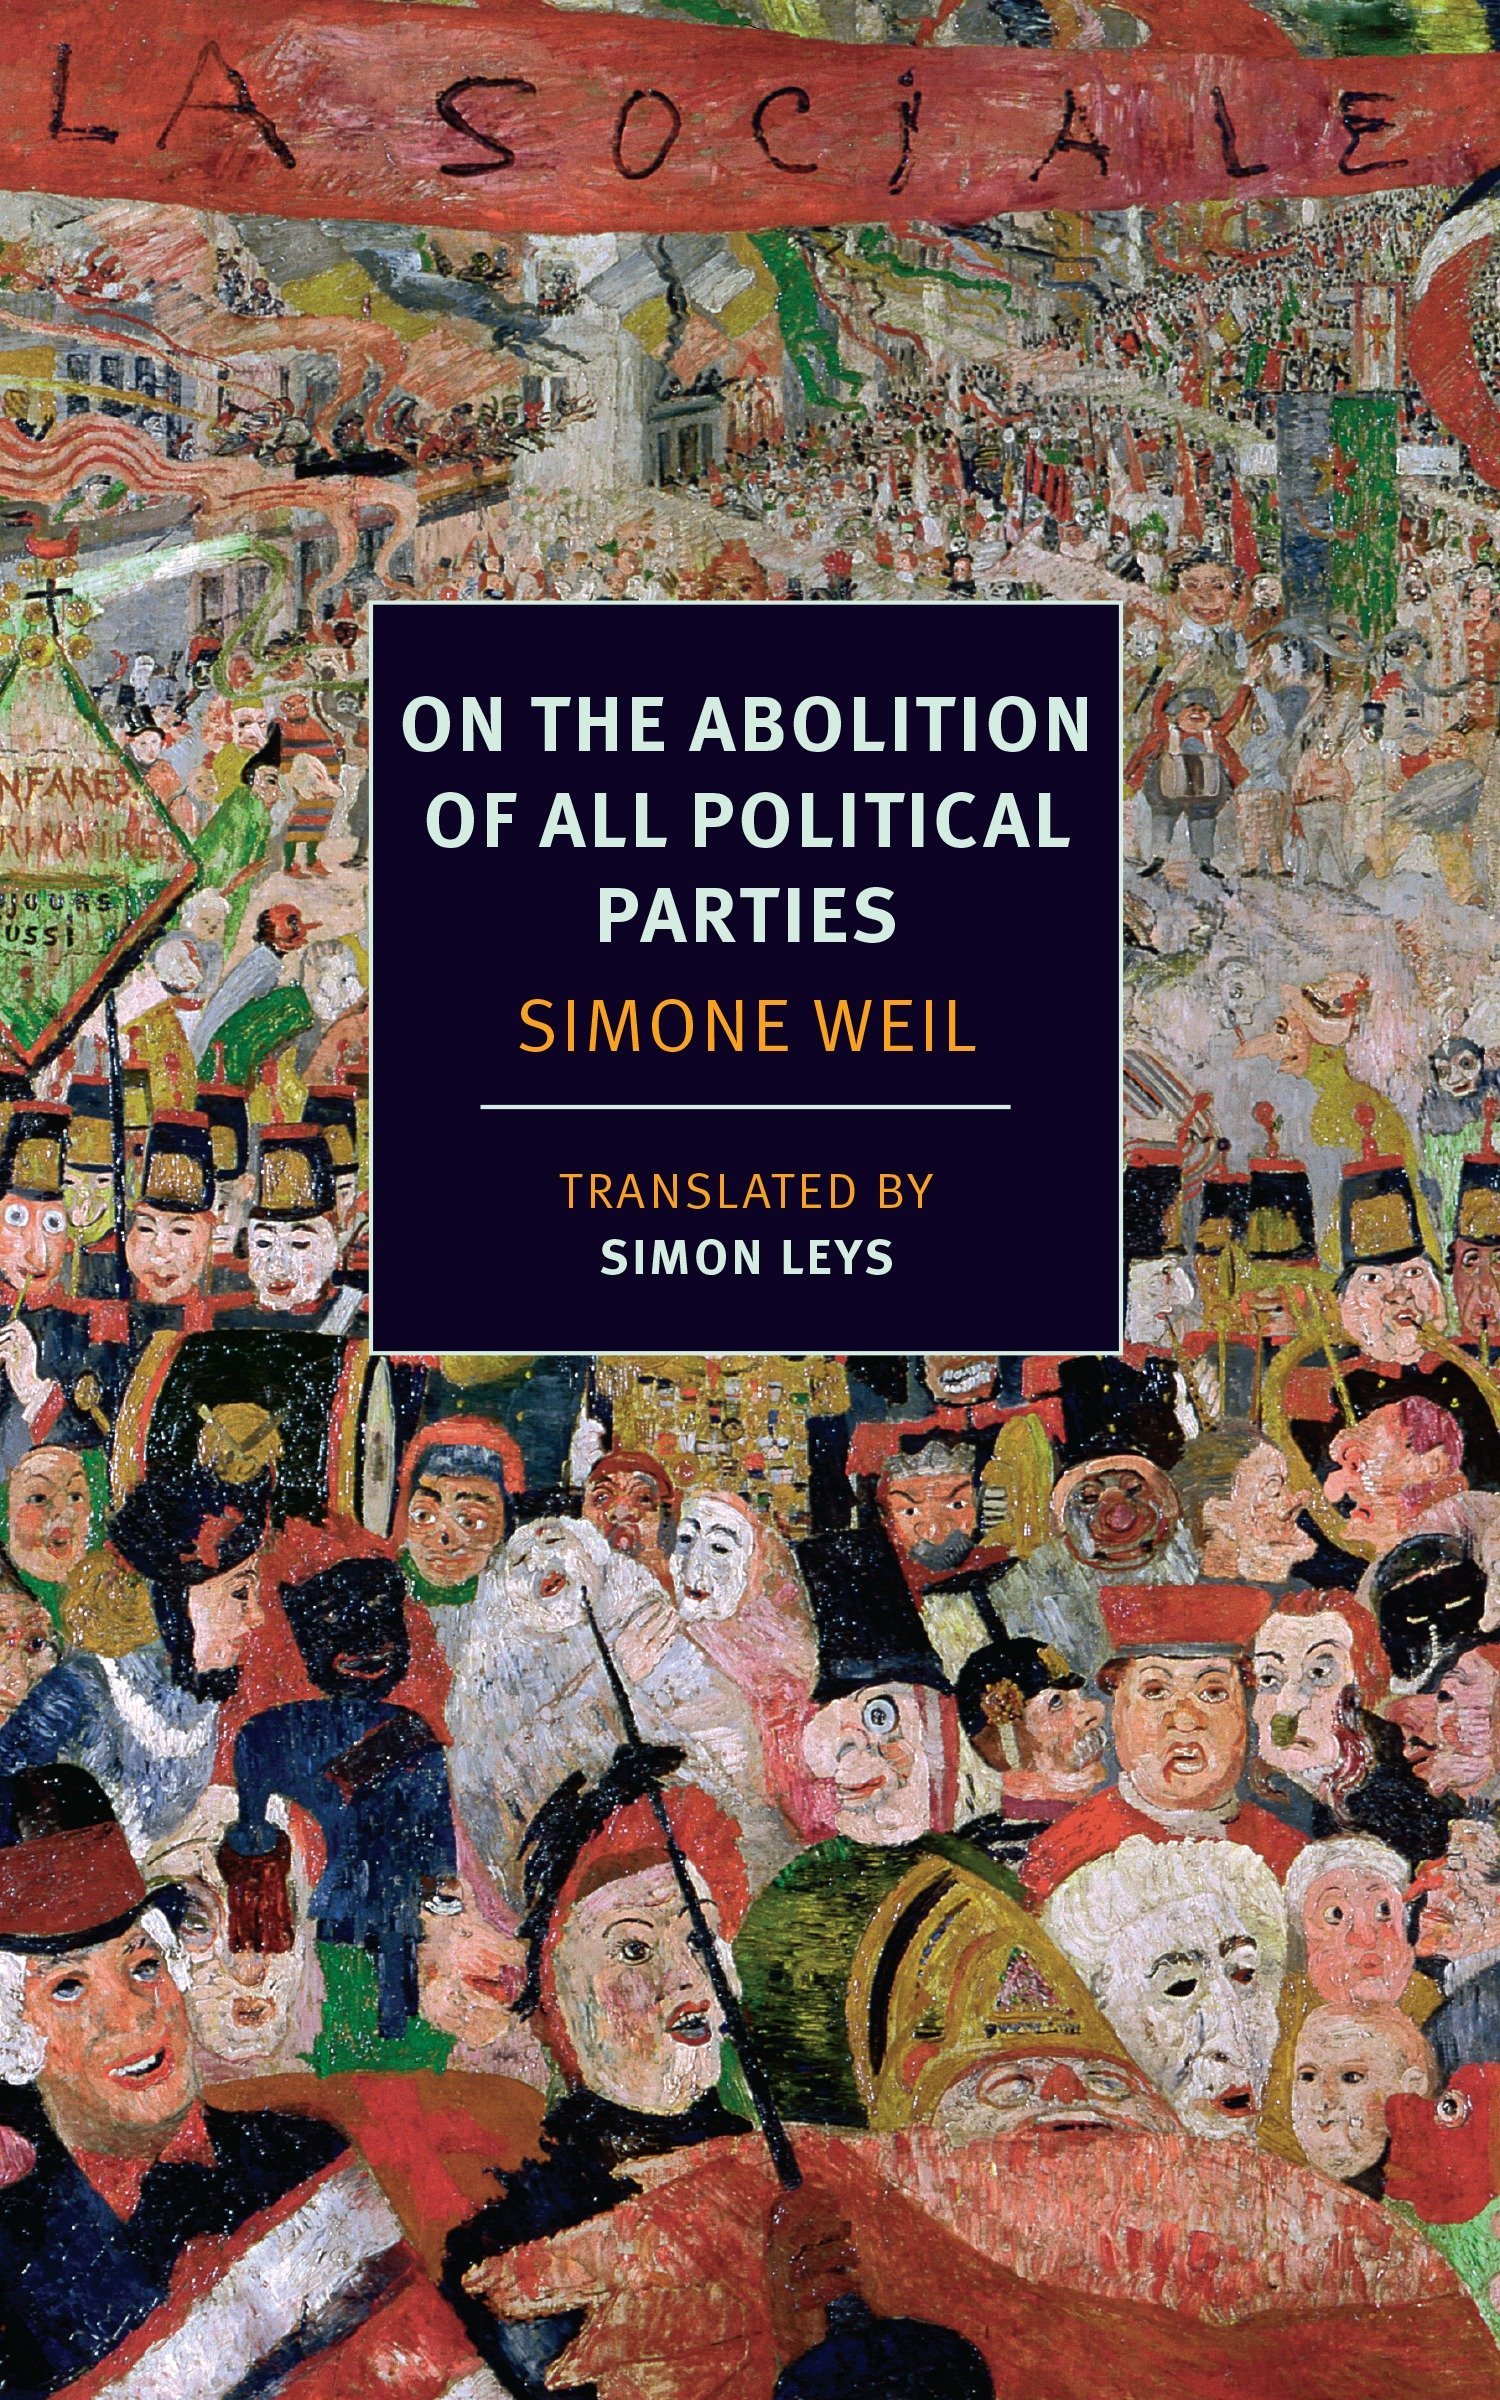 Simon Leys, Simone Weil, Czeslaw Milosz: On the Abolition of All Political Parties (2014, New York Review of Books, Incorporated, The)